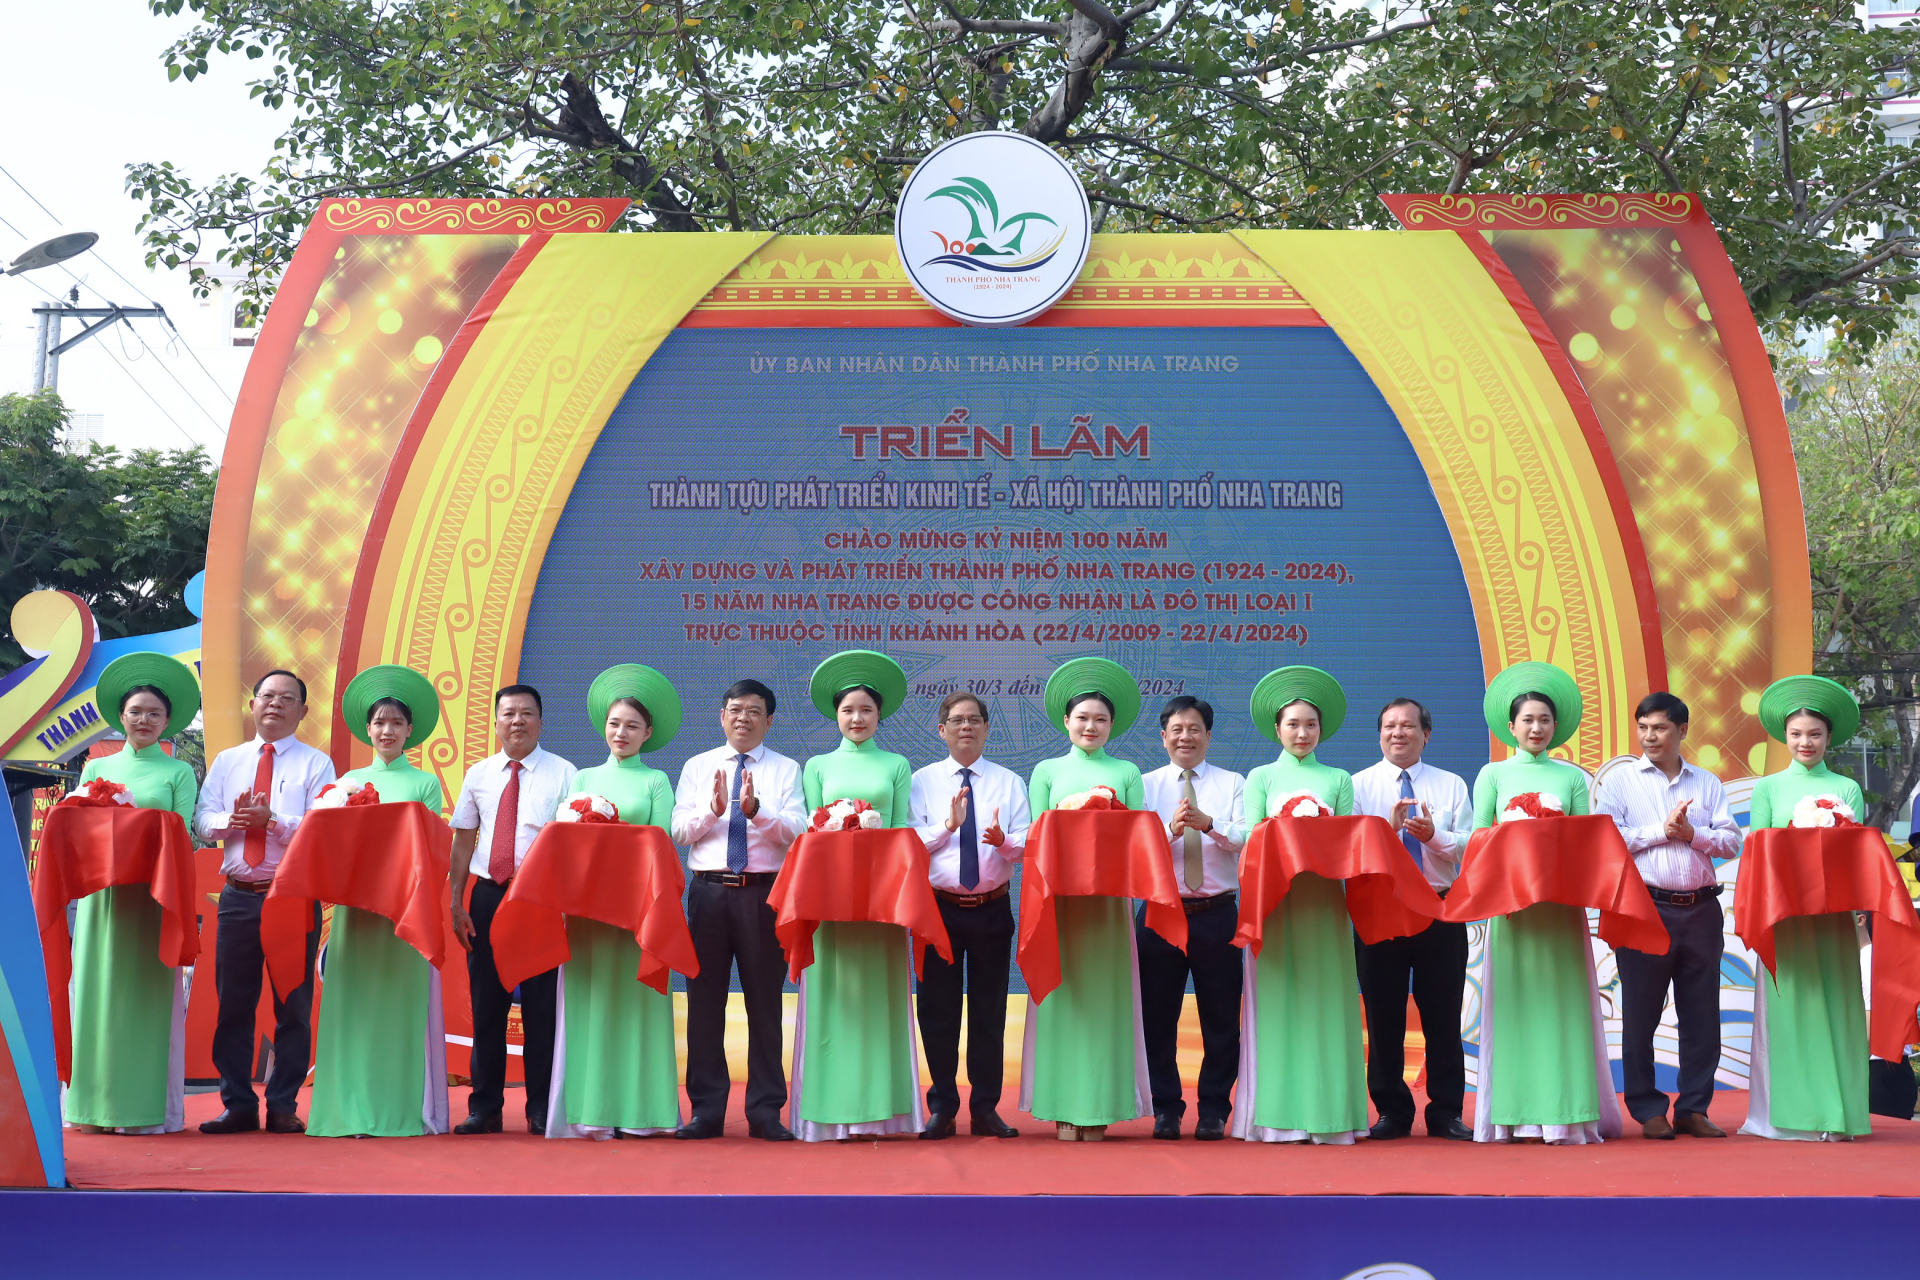 Nguyen Tan Tuan and Nha Trang City’s leaders cutting ribbon to open the exhibition

